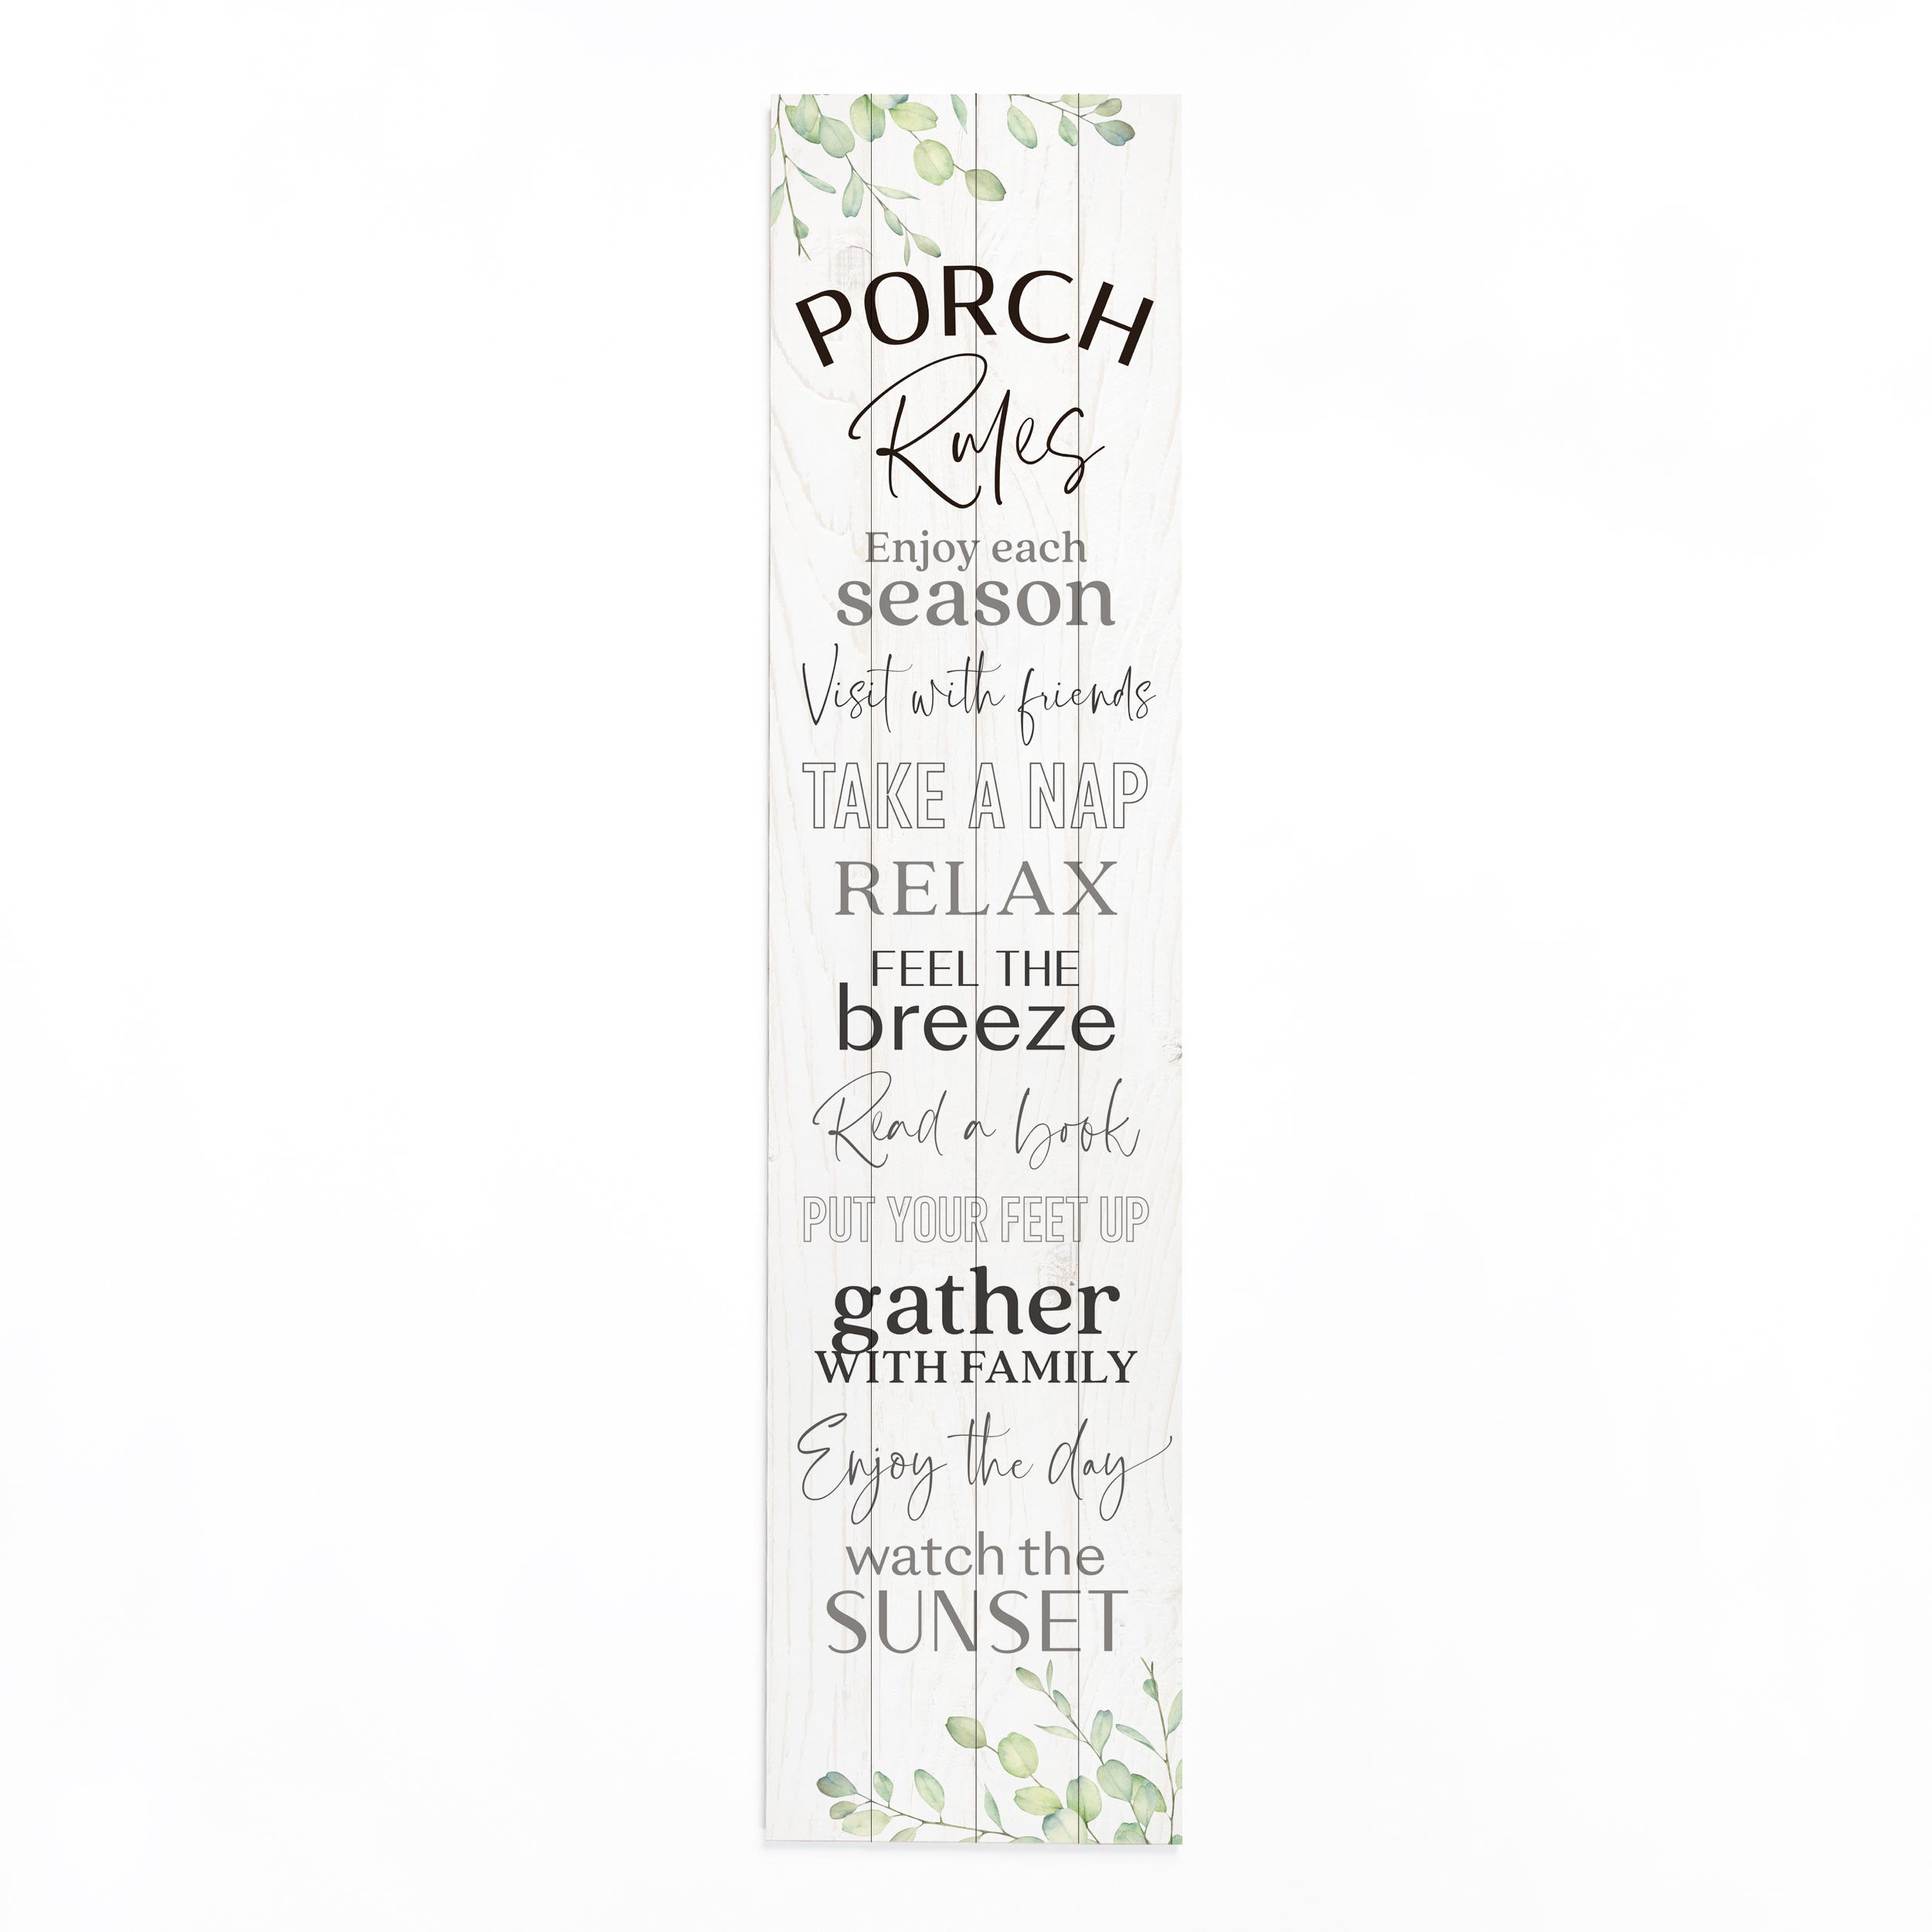 **Porch Rules Enjoy The Season Visit With Friends Outdoor Porch Sign